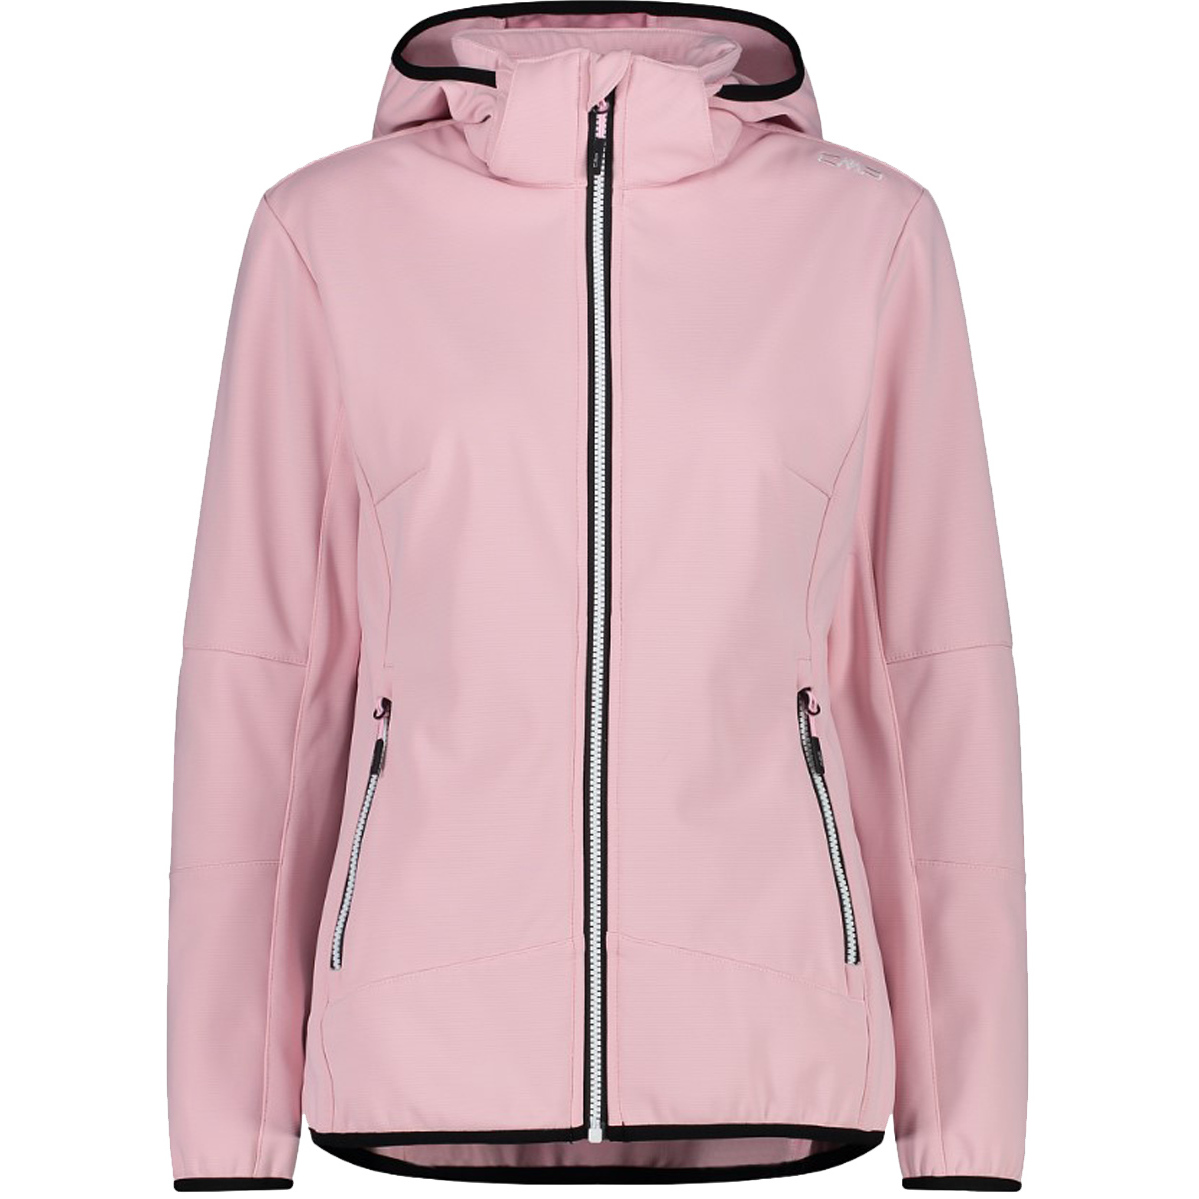 IN CMP SOFTSHELL Mascheroni Pink Donna GIACCA Store |